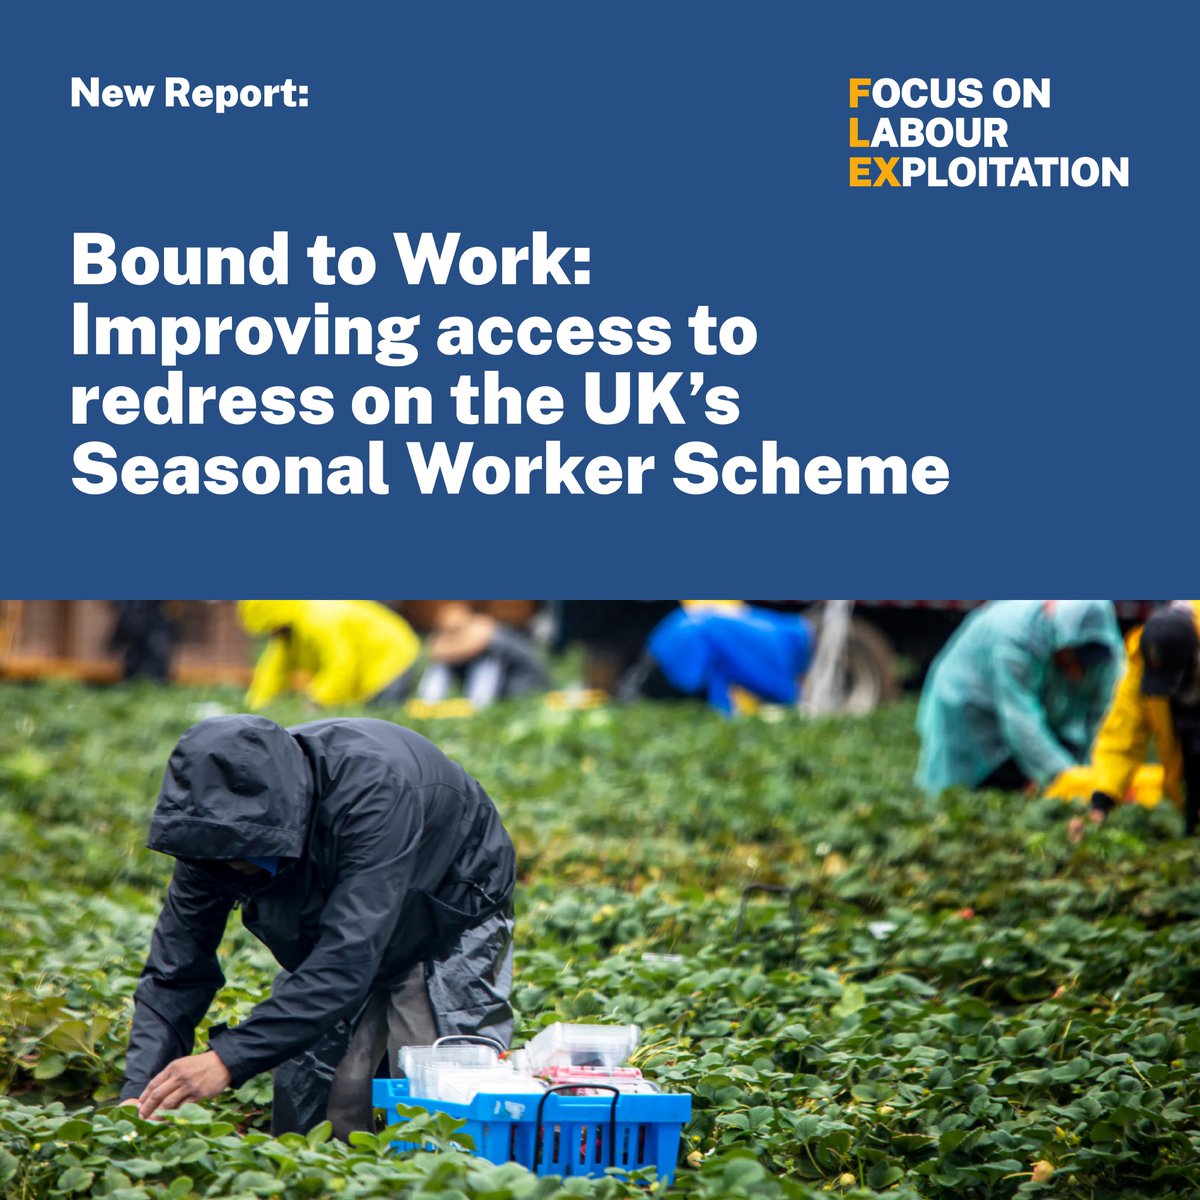 Today we launch our new report on agricultural work in the UK. This report – the 2nd in our series on the seasonal worker visa – sheds light on the conditions that are leaving thousands of people trapped in cycles of debt. Read it here:bit.ly/3UpNYRD 🧵